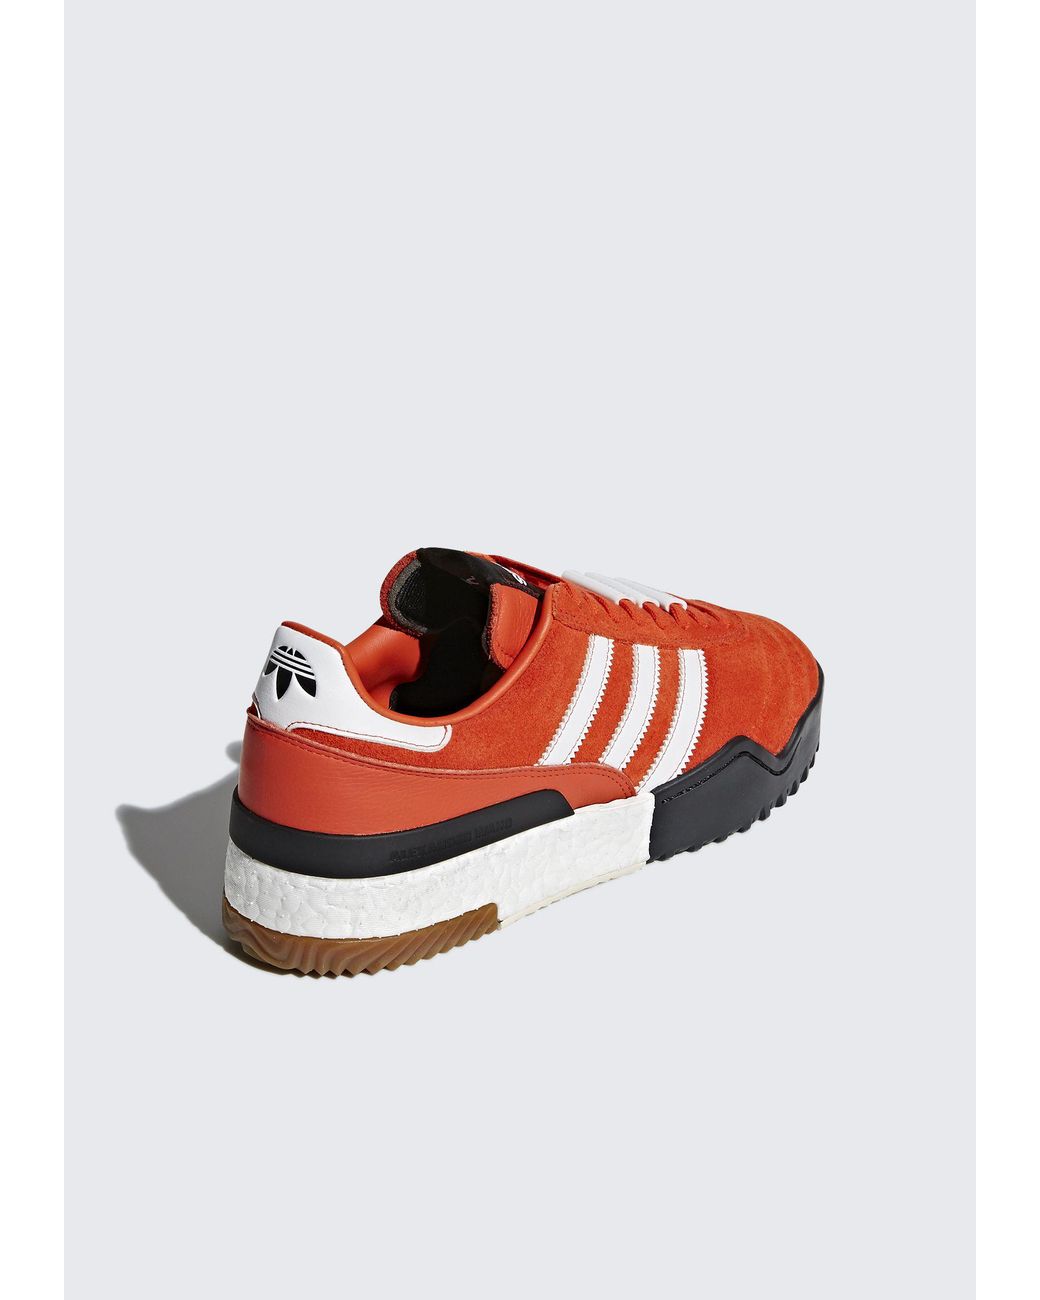 Alexander Wang Adidas Originals By Aw Bball Soccer Shoes in Red | Lyst